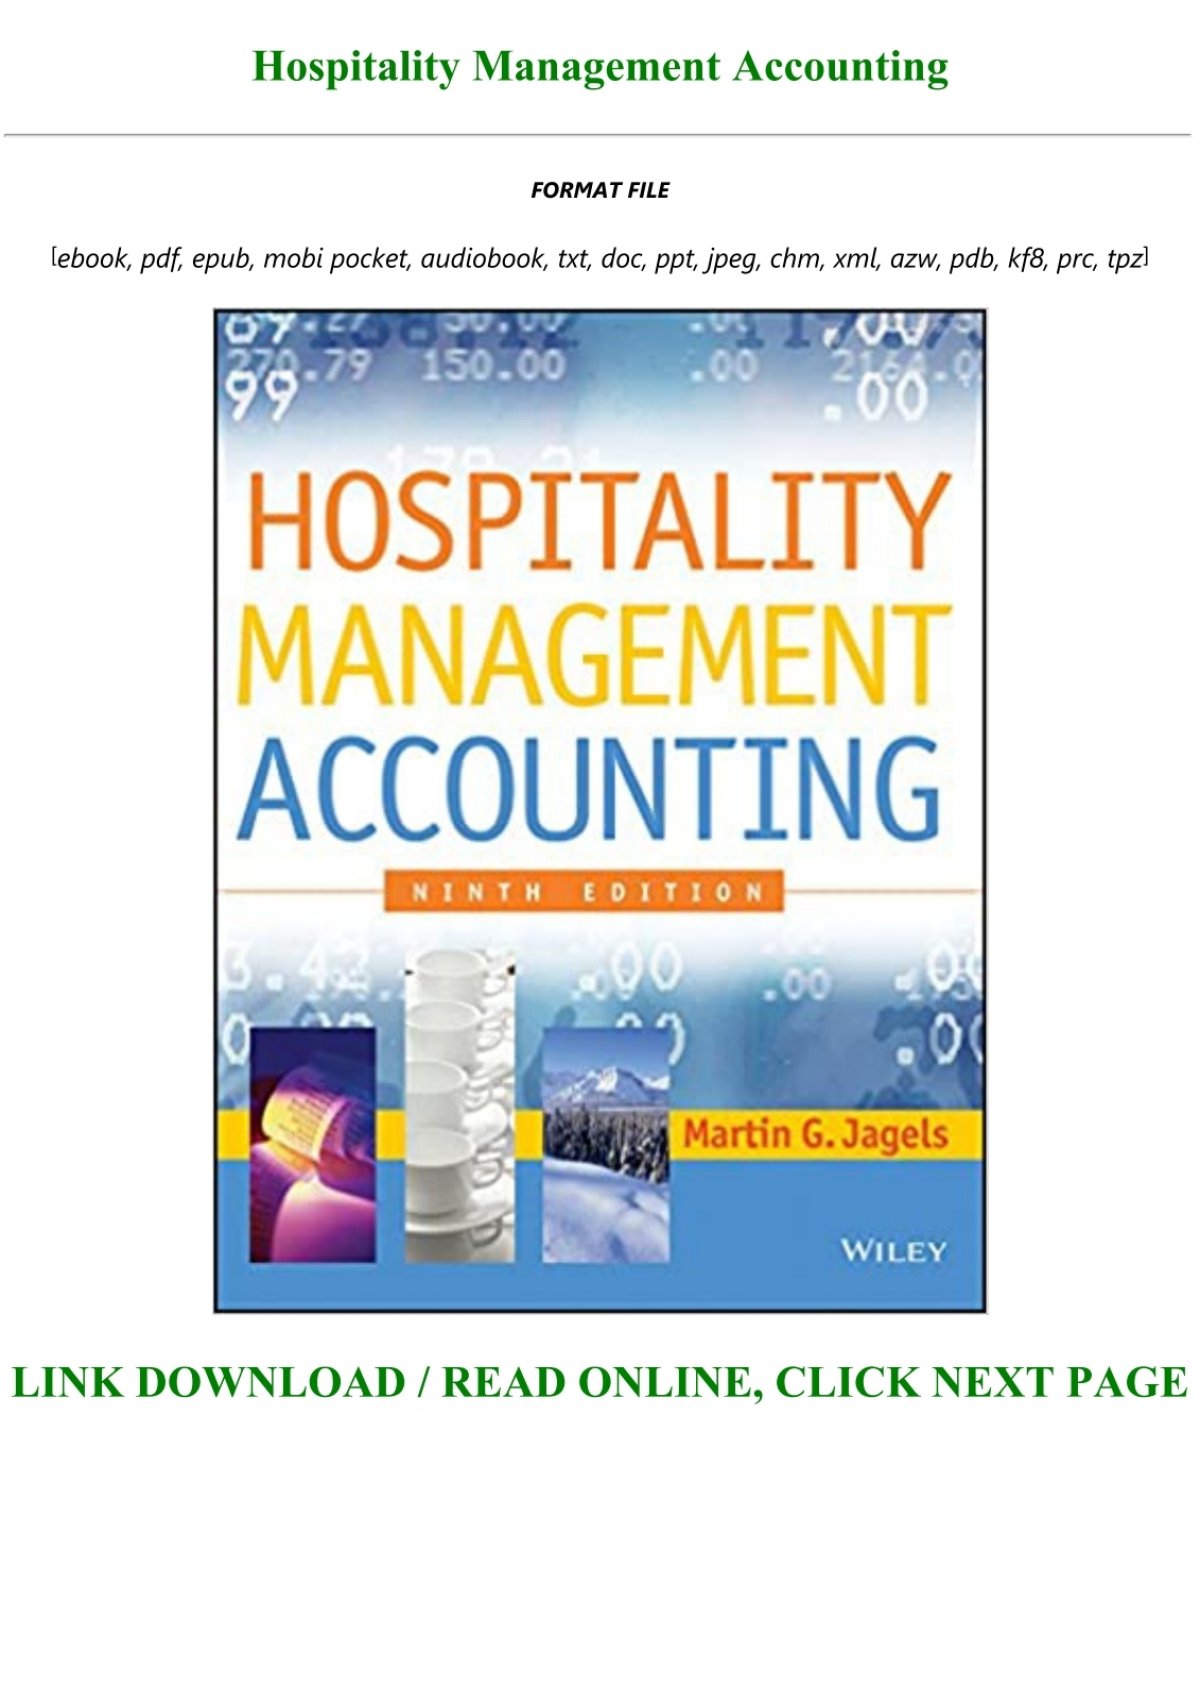 Download Pdf Hospitality Management Accounting Pre Order